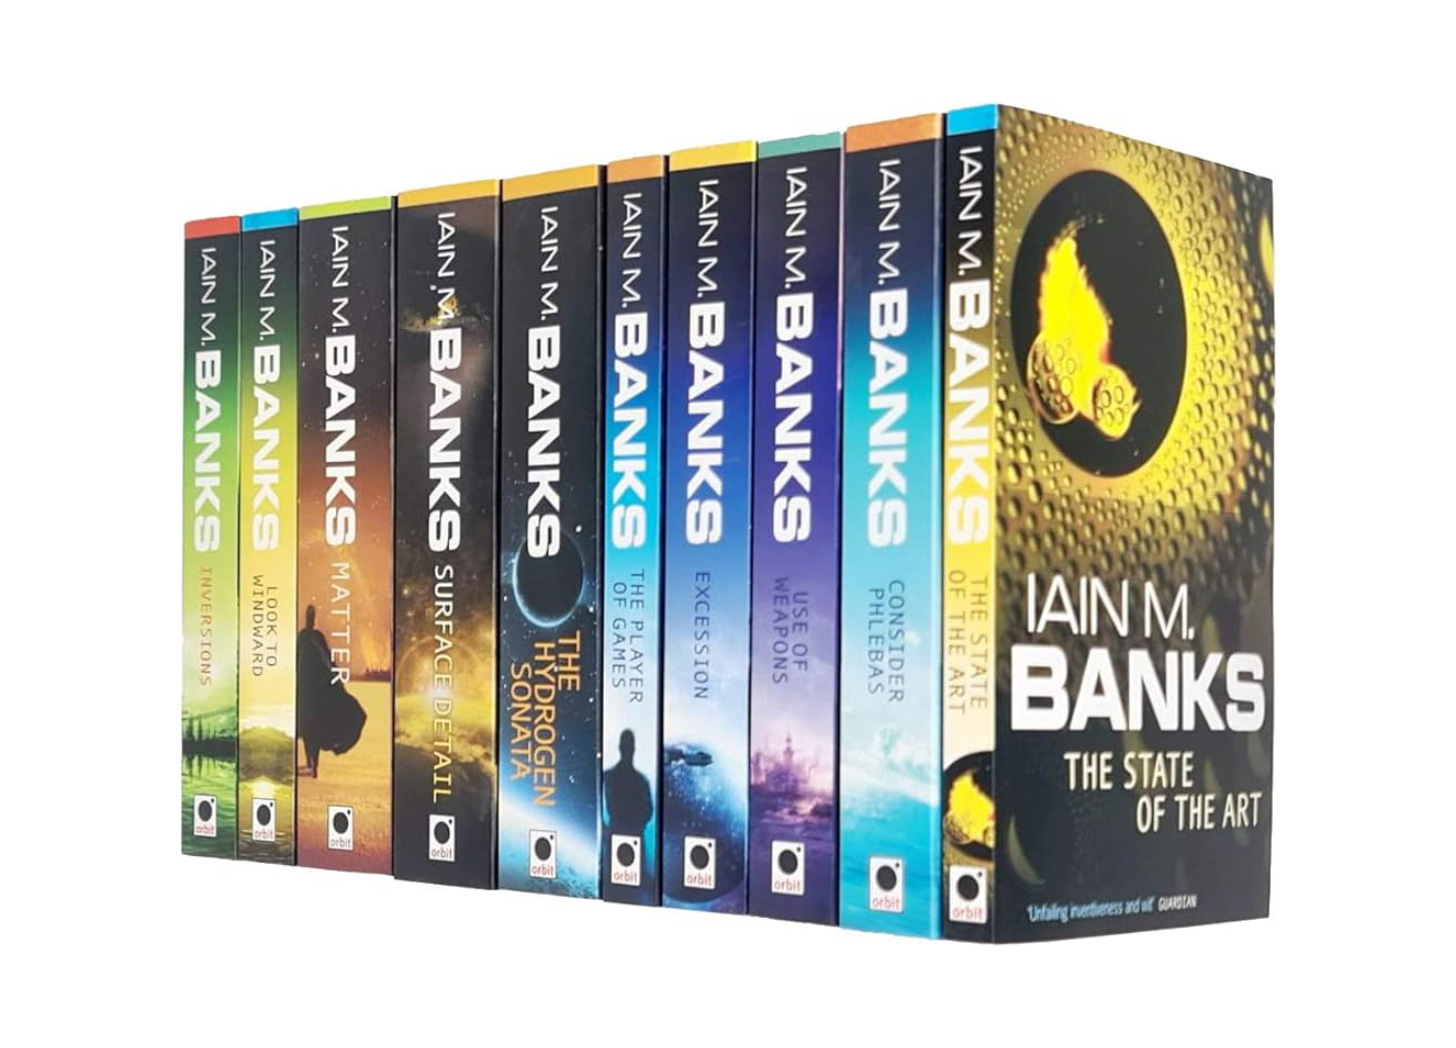 The ten novels of the Culture by Iain M. Banks in a row